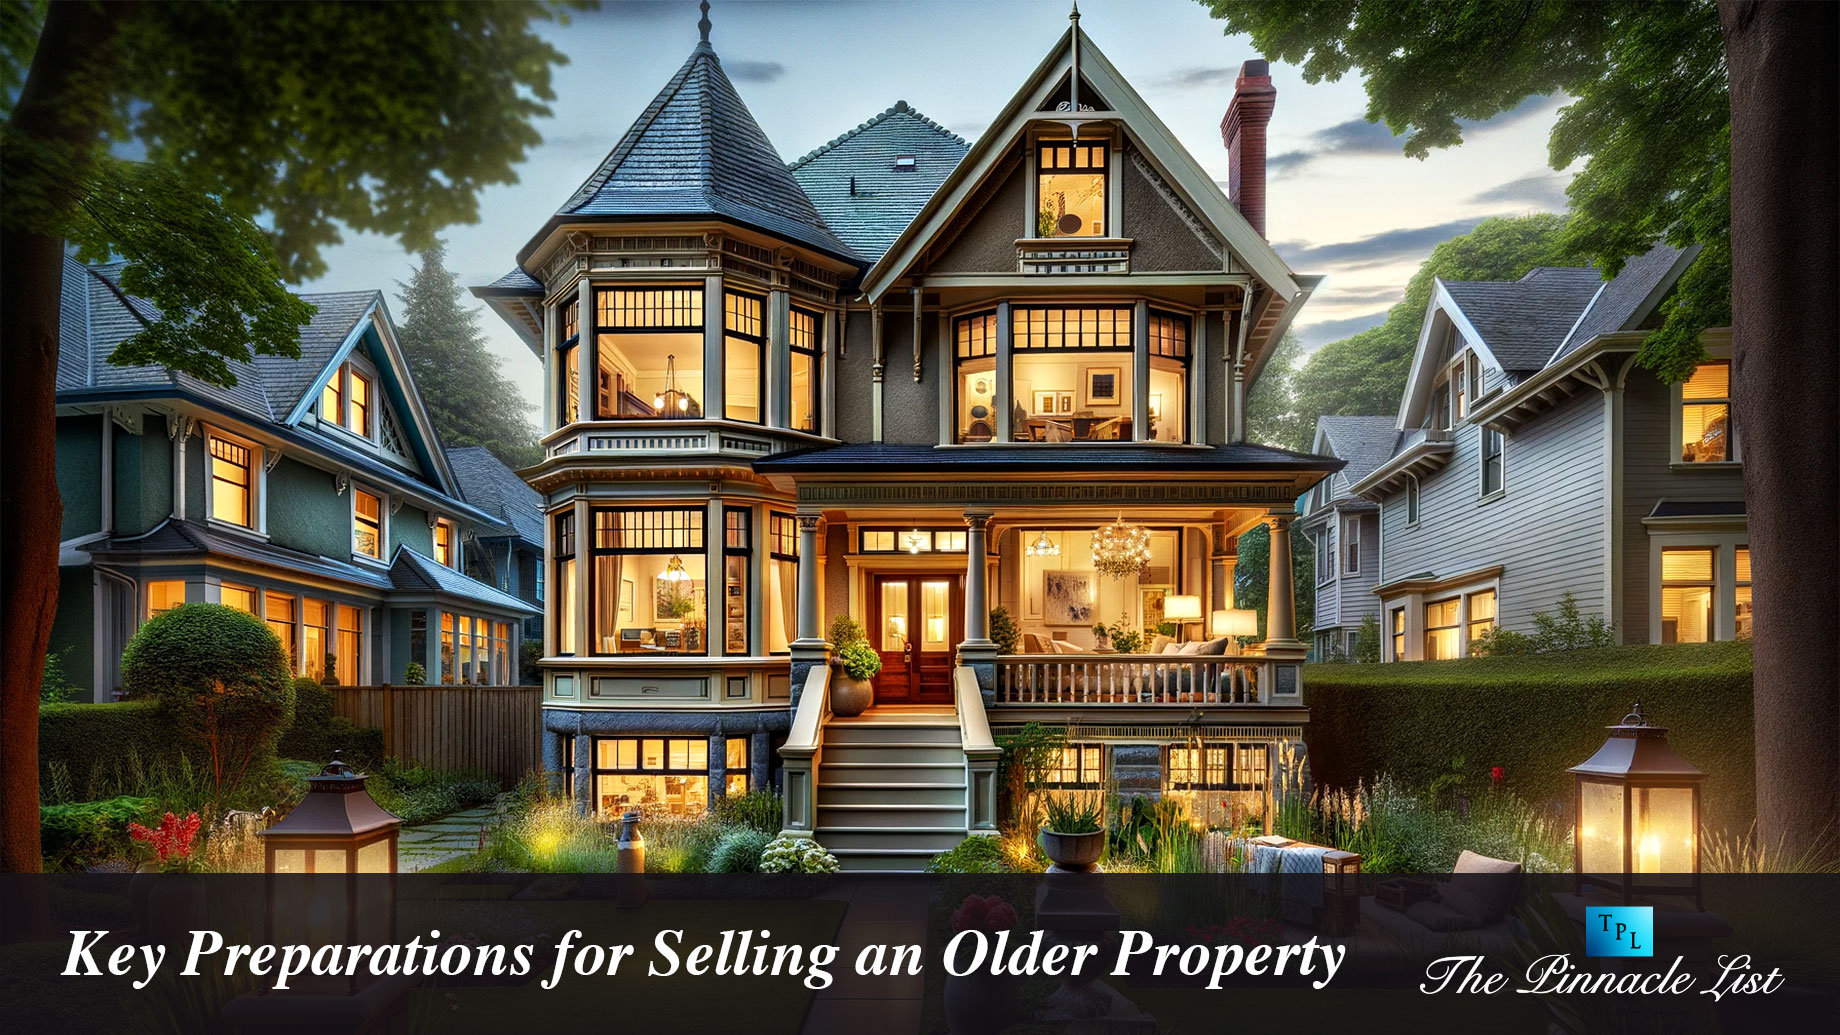 Key Preparations for Selling an Older Property